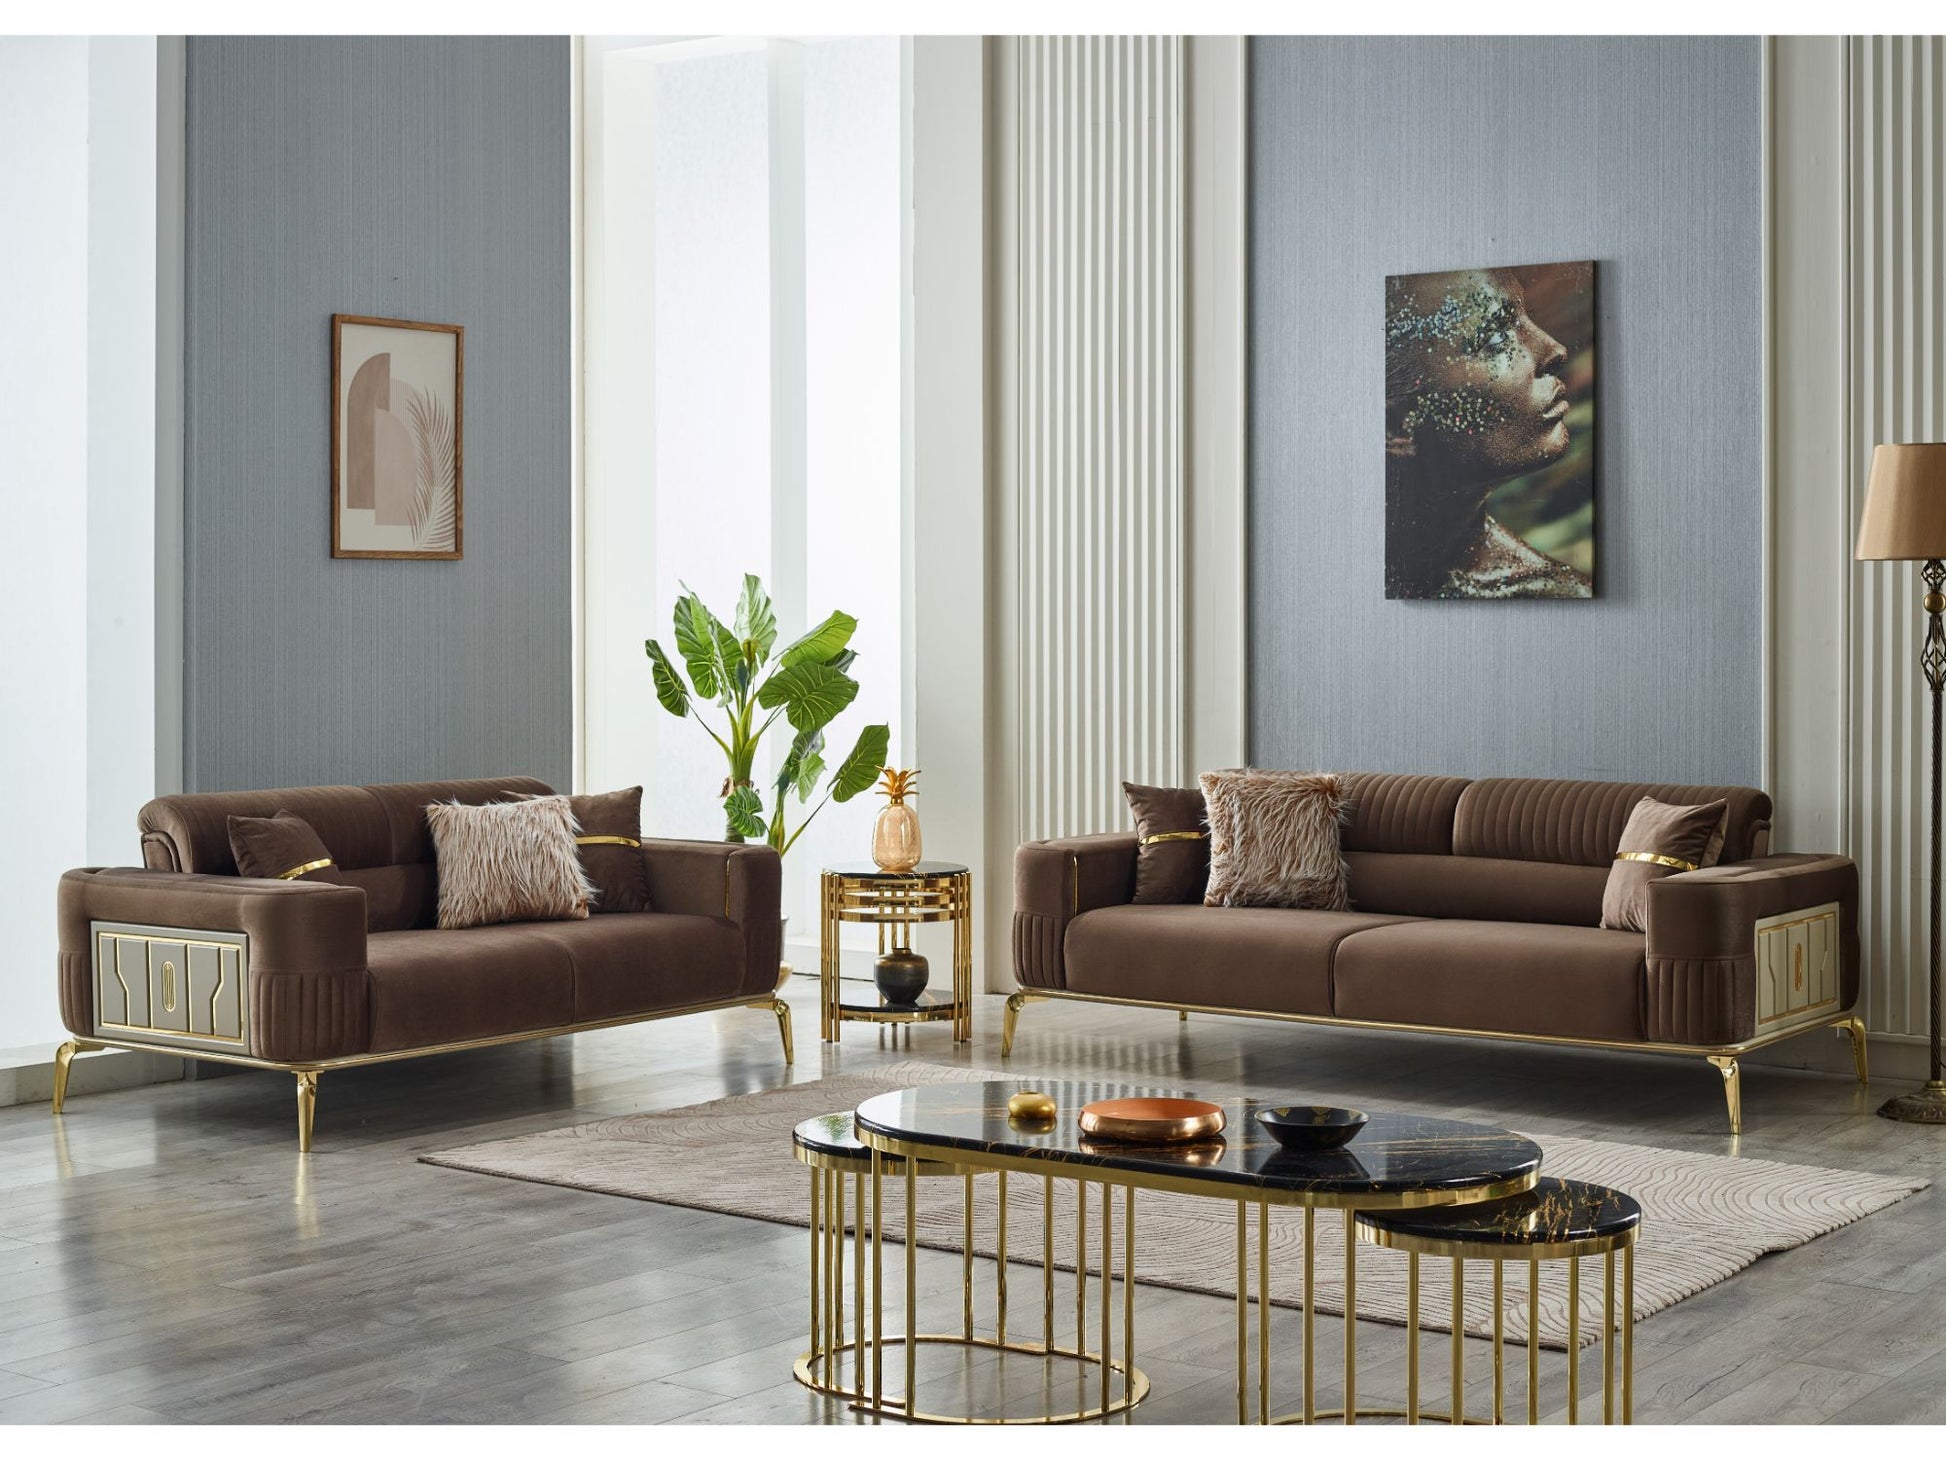 Convertible Livingroom (2 Sofa & 2 Chair) Brown With Gold Legs